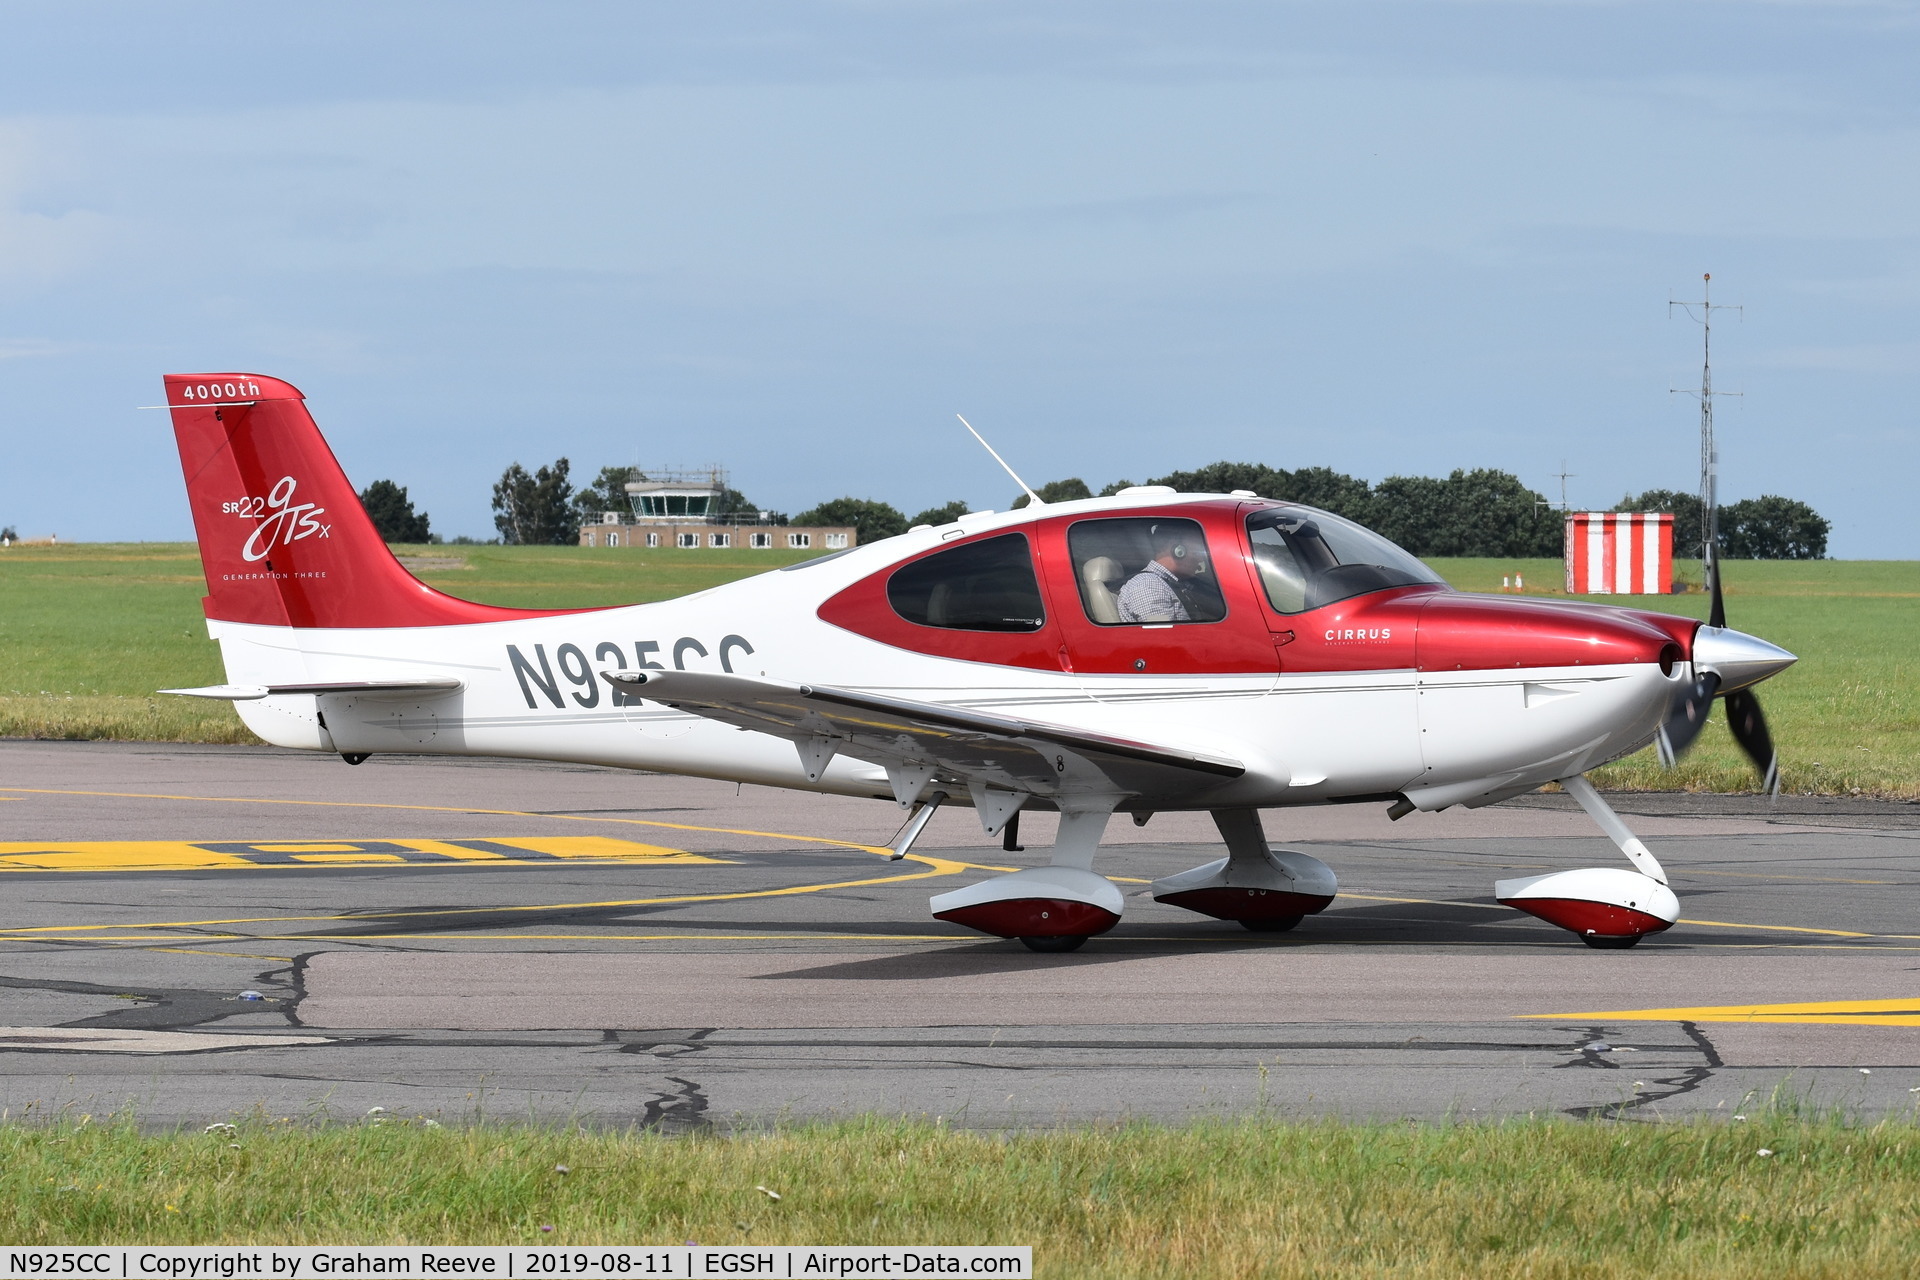 N925CC, 2008 Cirrus SR22 G3 GTSX Perspective C/N 2992, Departing from Norwich.